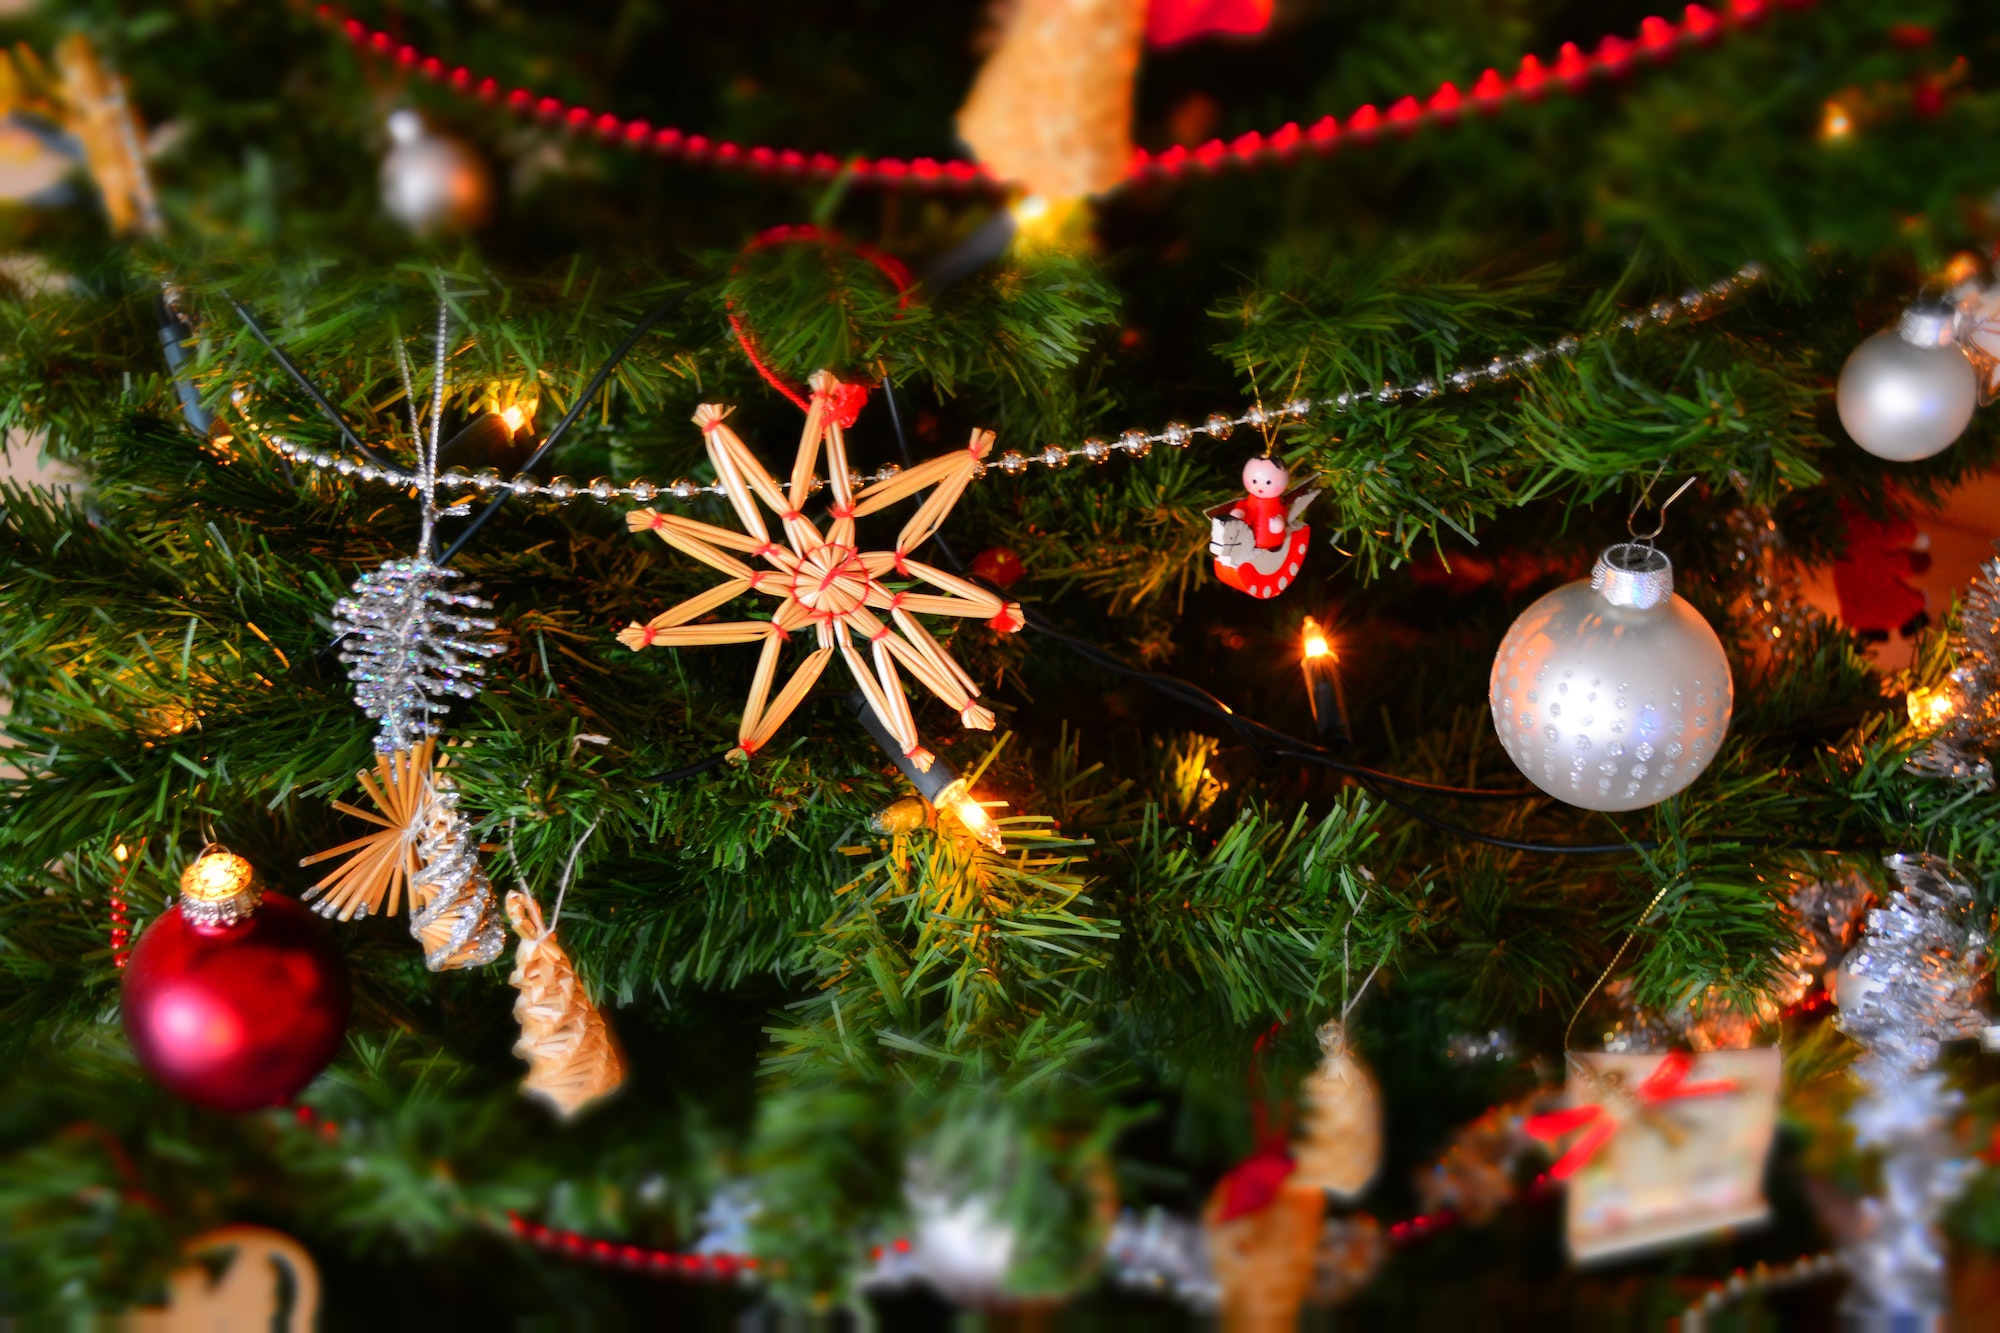 Close-up photograph of ornaments on a Christmas tree.